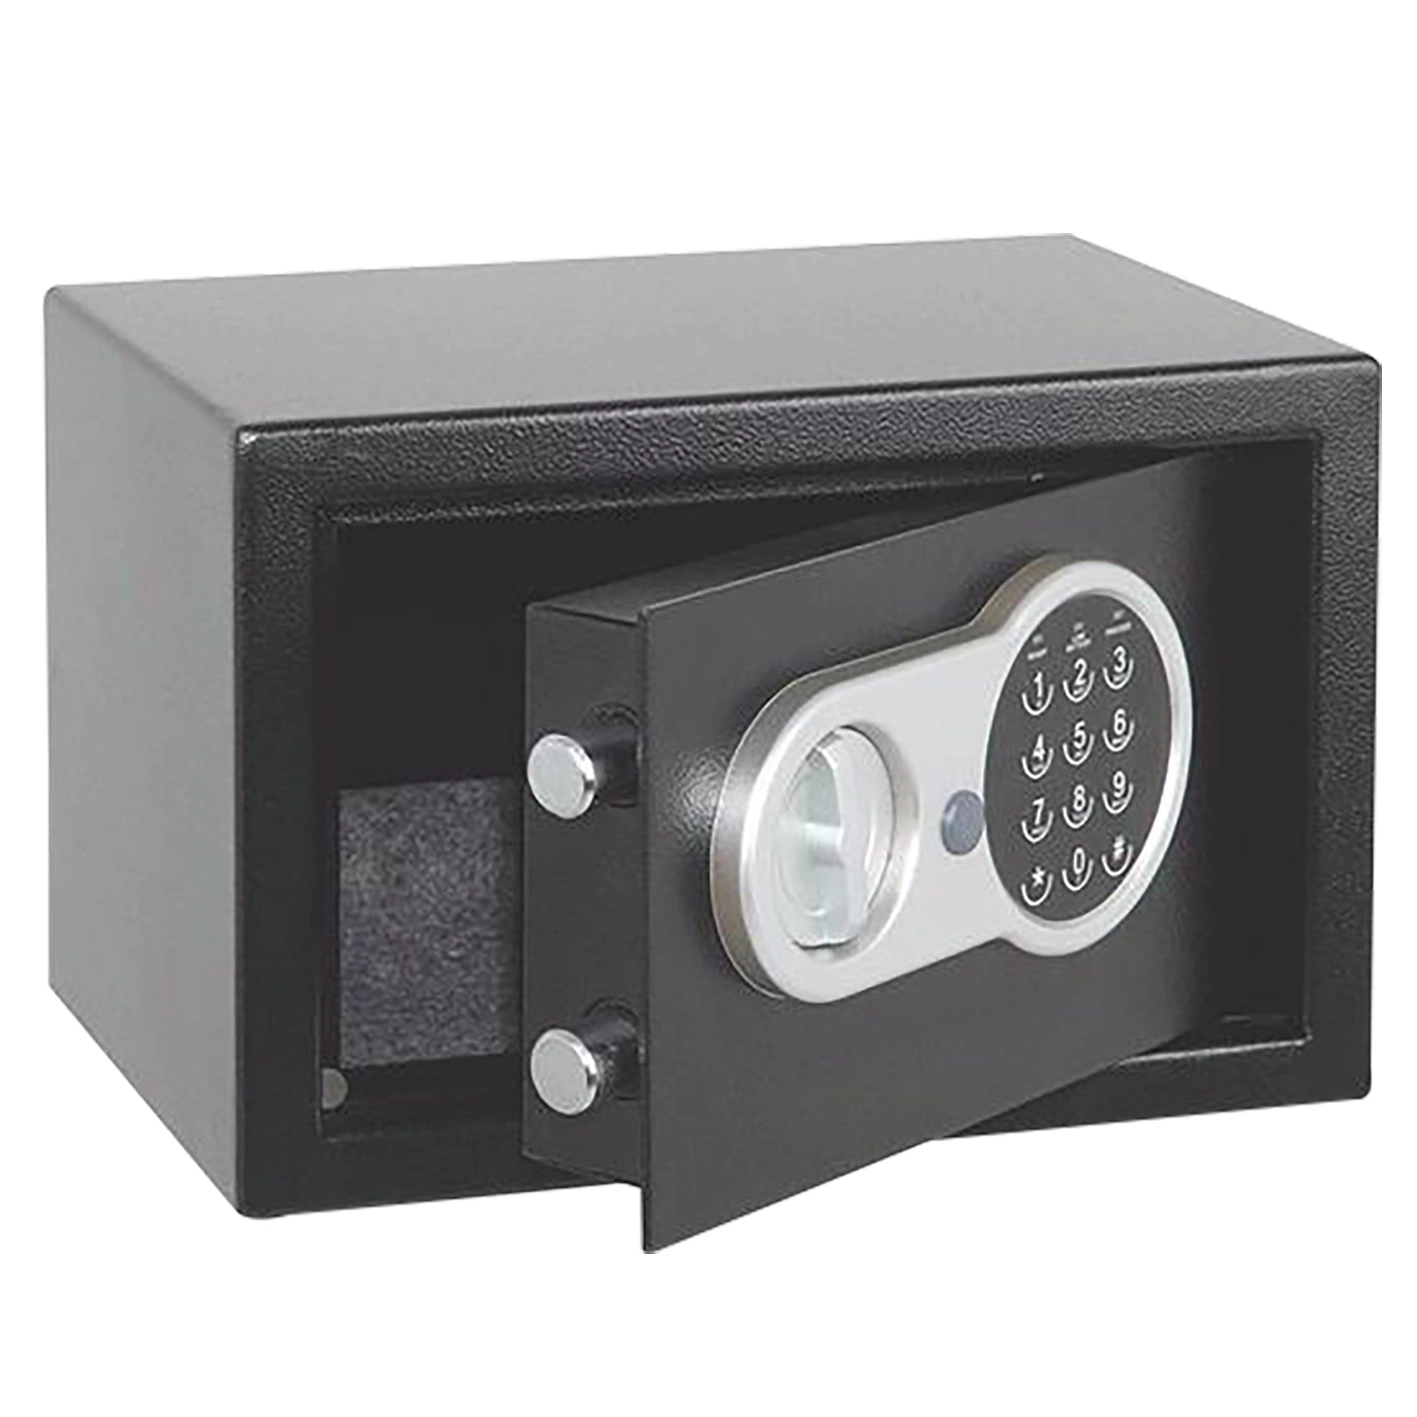 Small Size Electronic Password Home Safe Box with Indicator Light